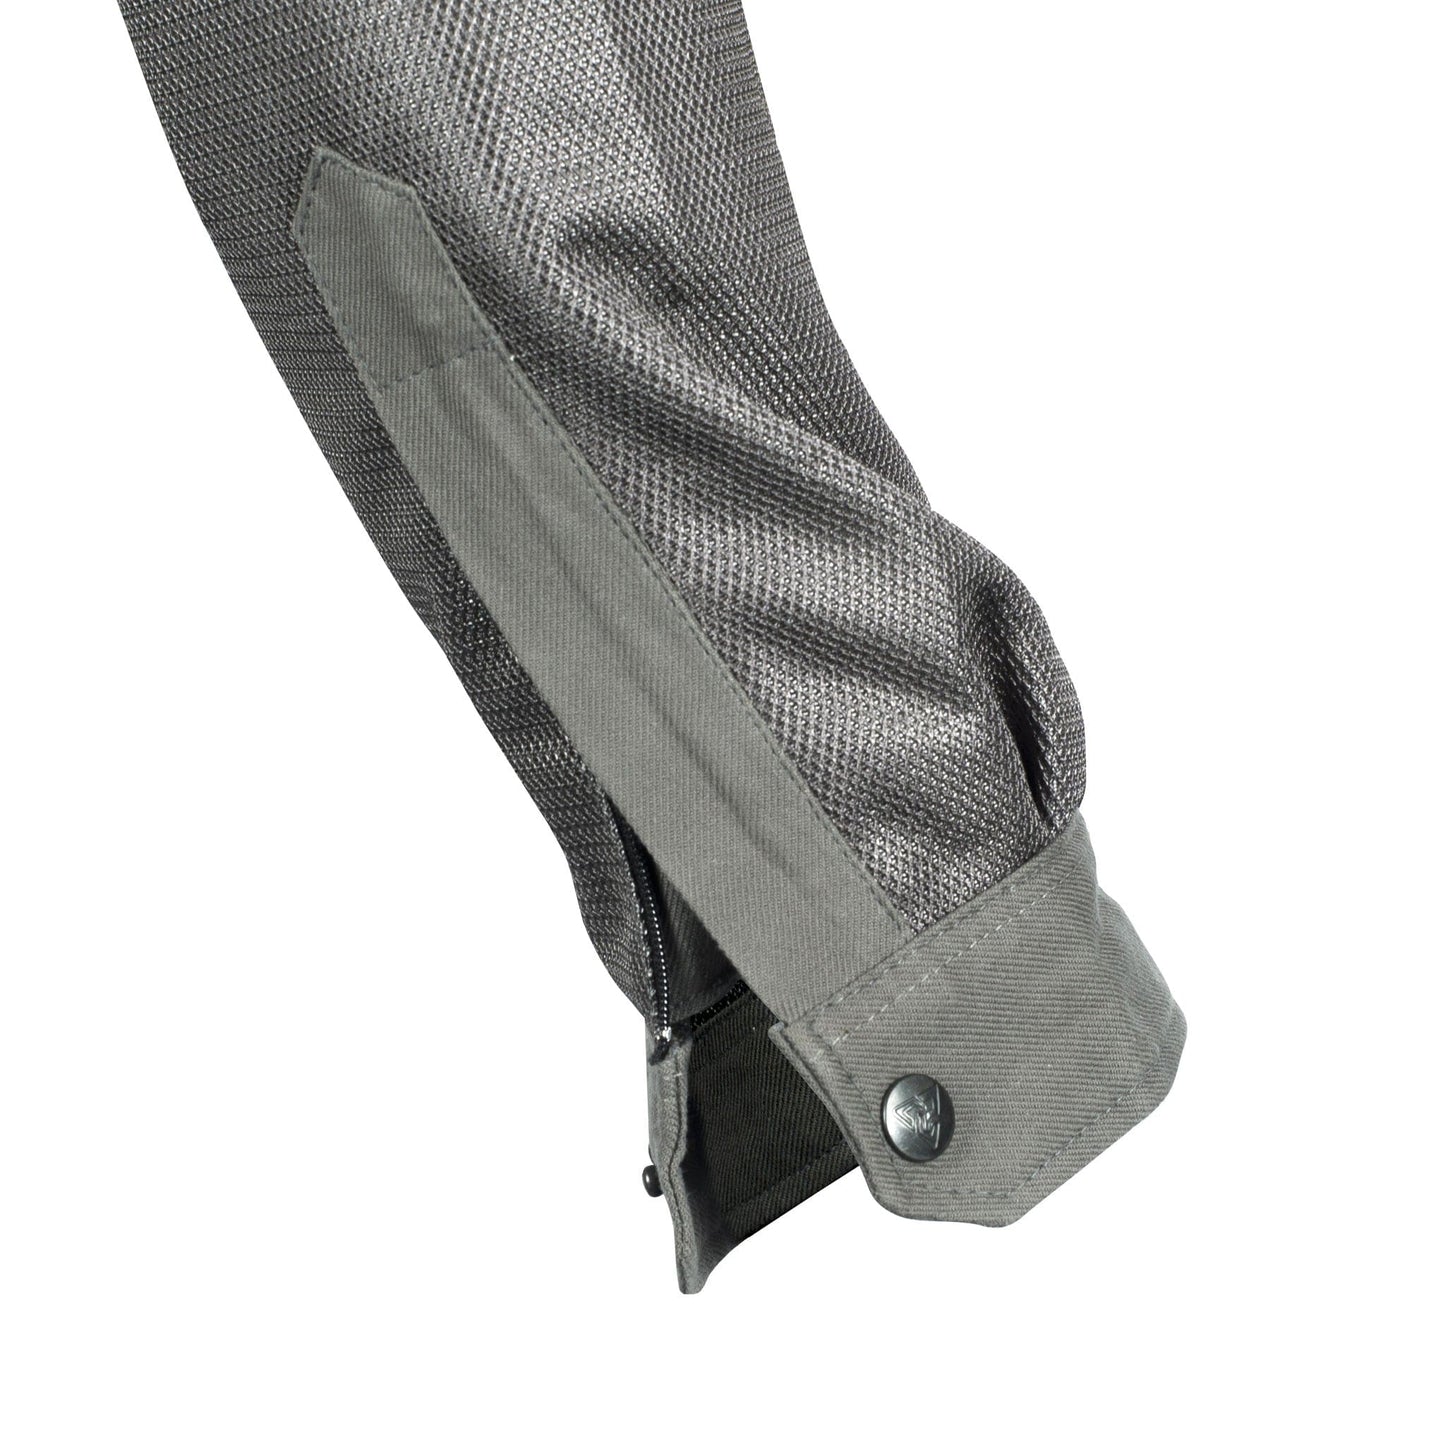 Protective Summer Mesh Shirt - Grey Solid with Pads - REVRides